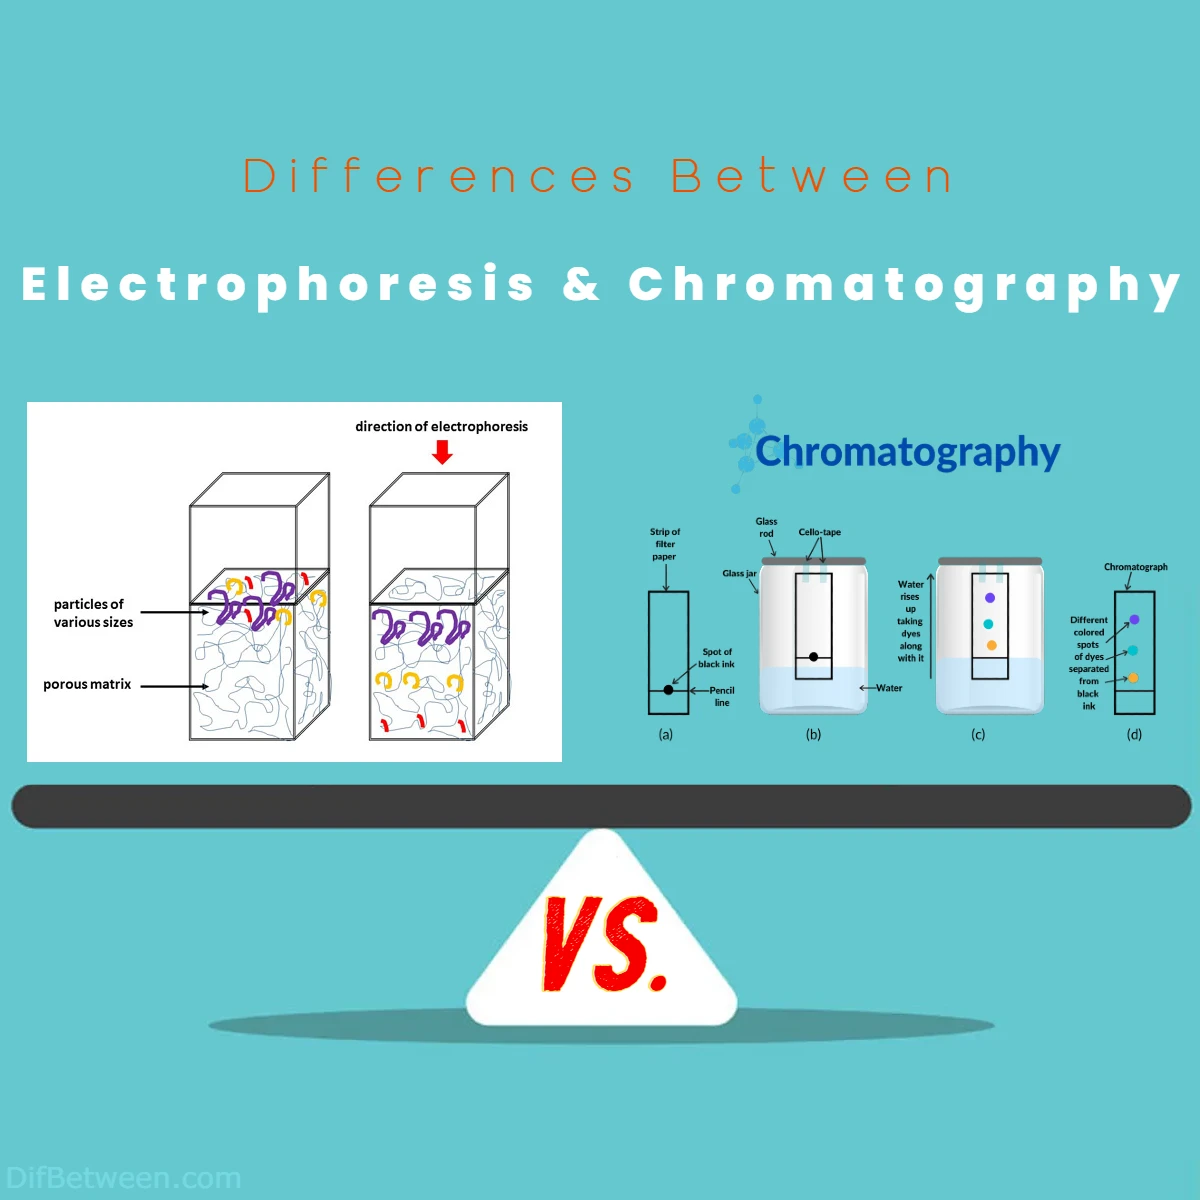 Differences Between Electrophoresis vs Chromatography